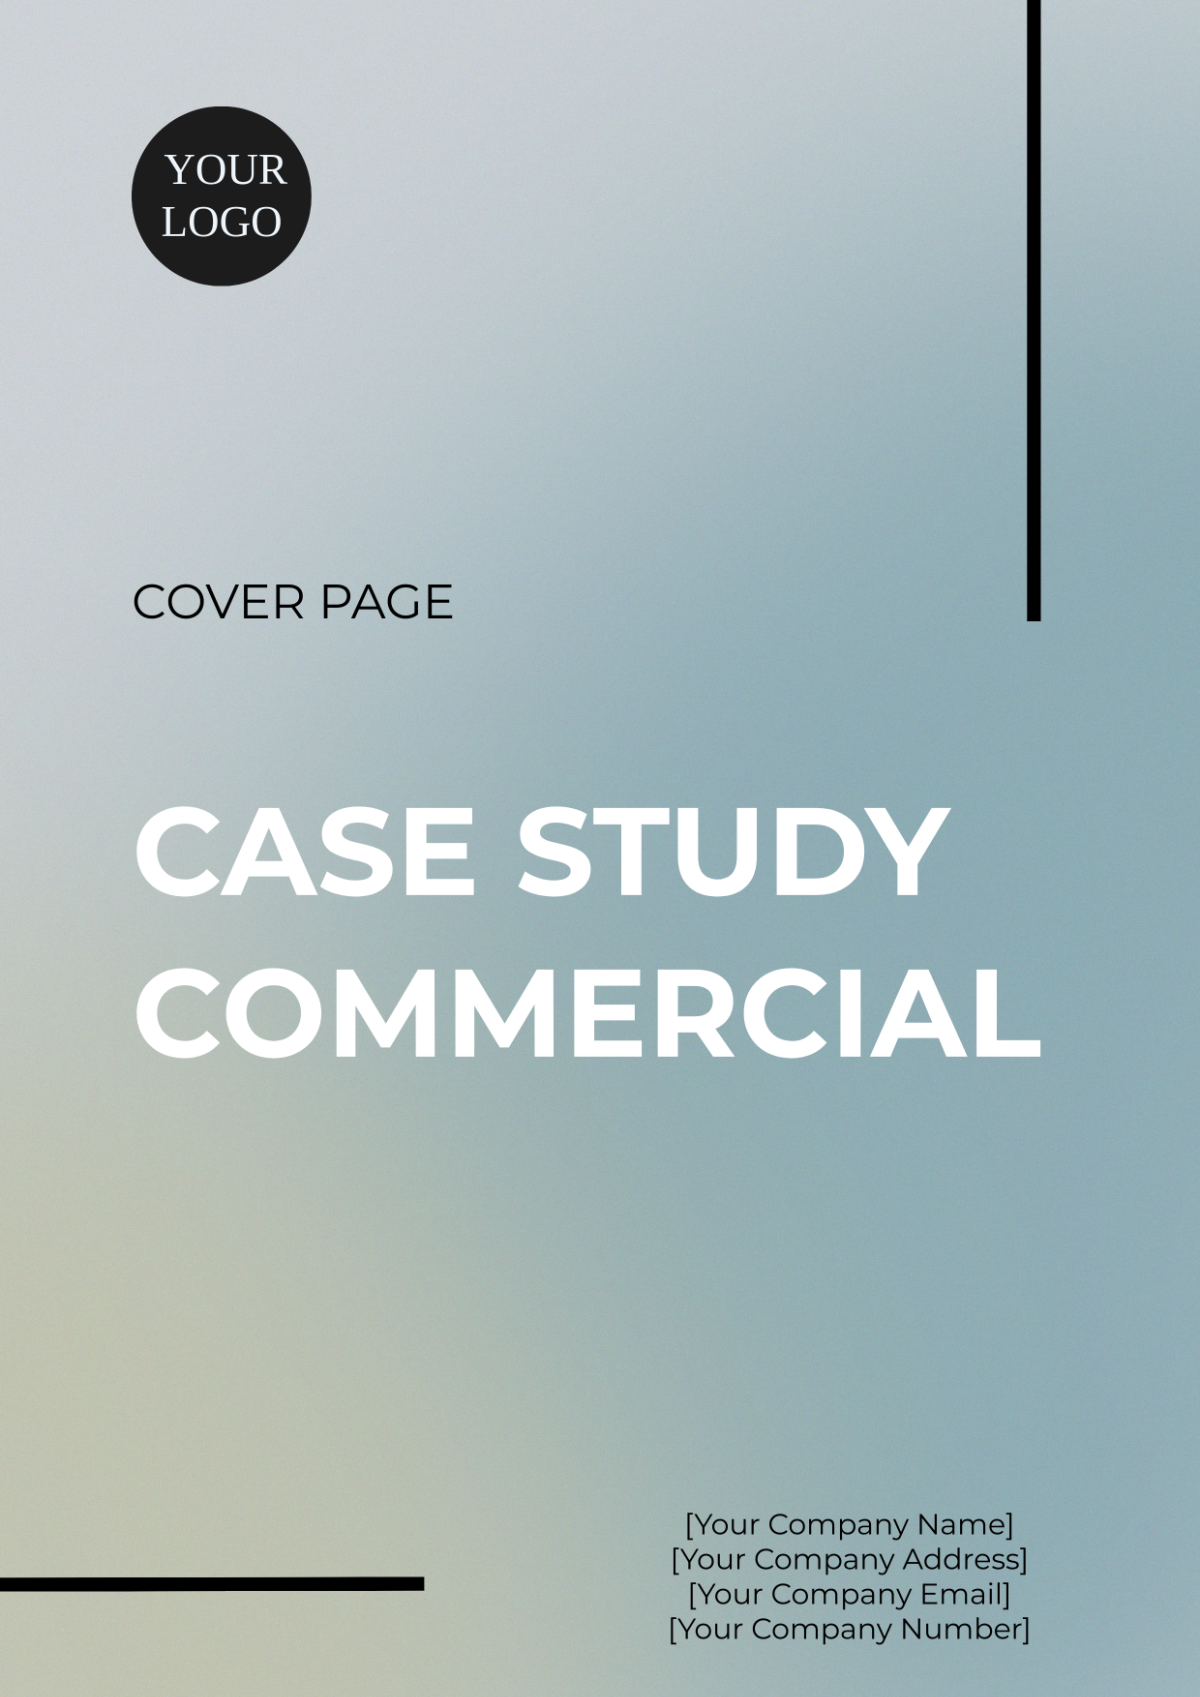 Case Study Commercial Cover Page